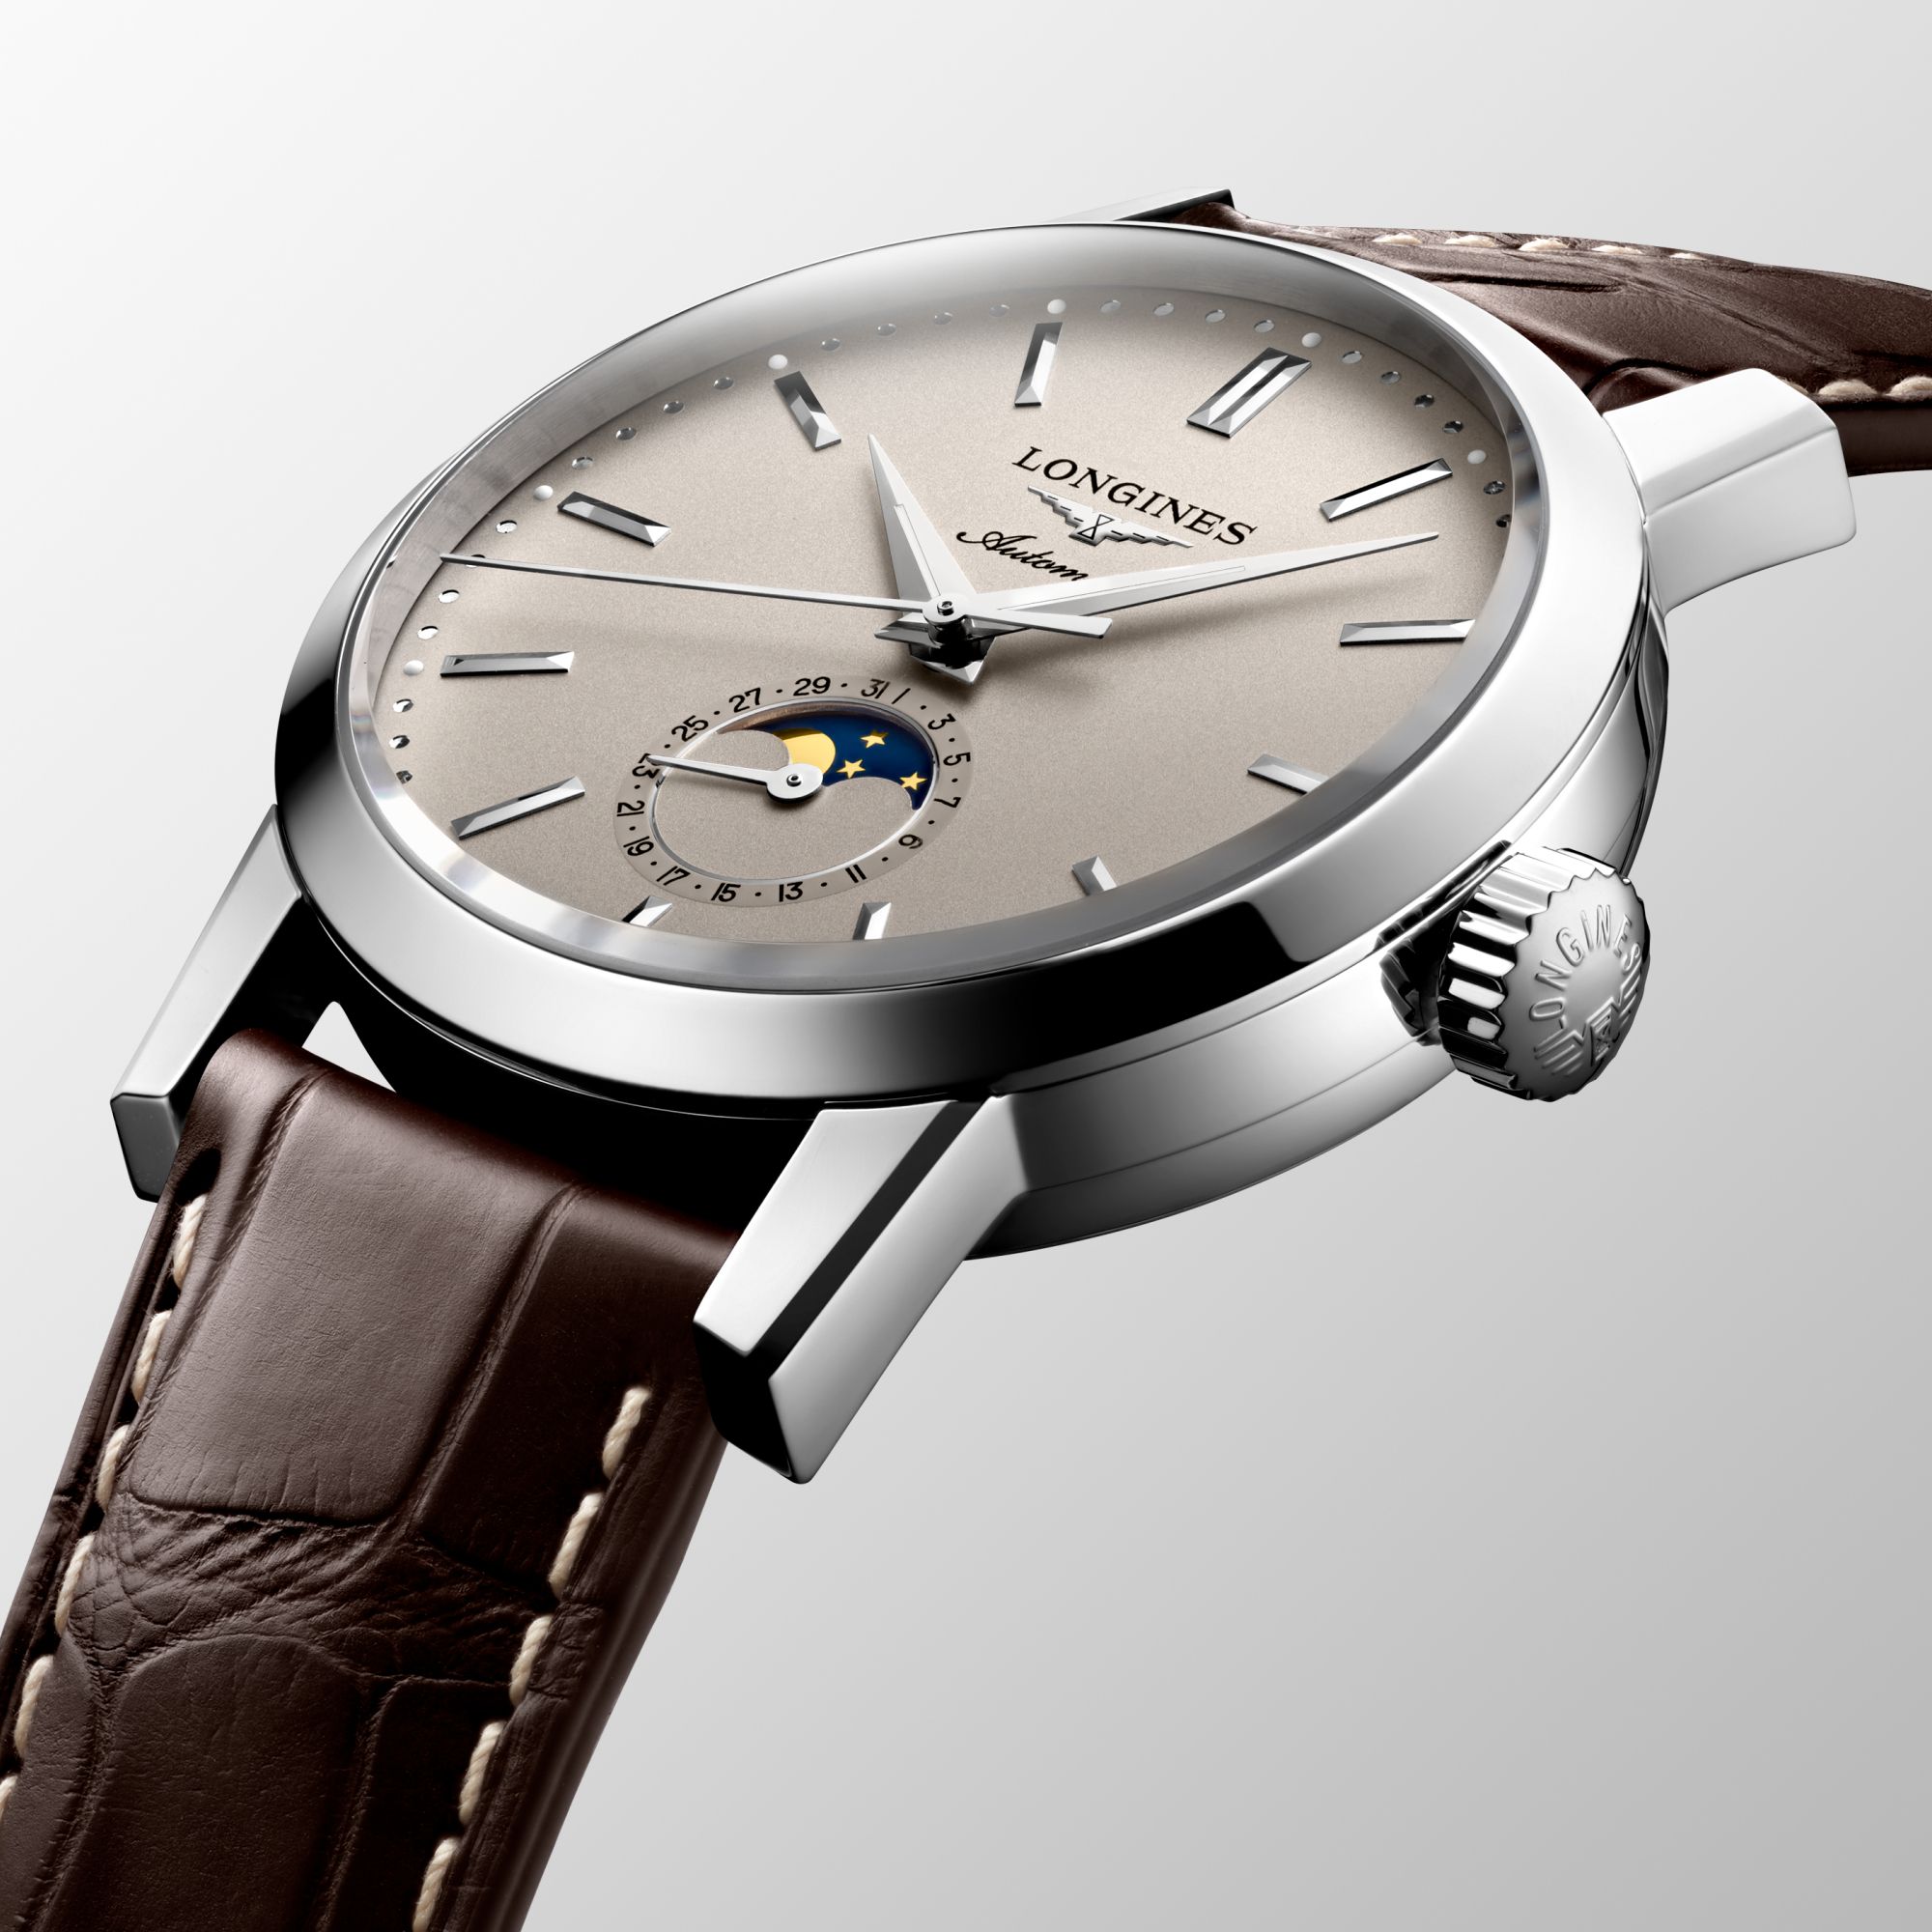 The Longines 1832 Watchmaking Tradition Référence :  L4.826.4.92.2 -2